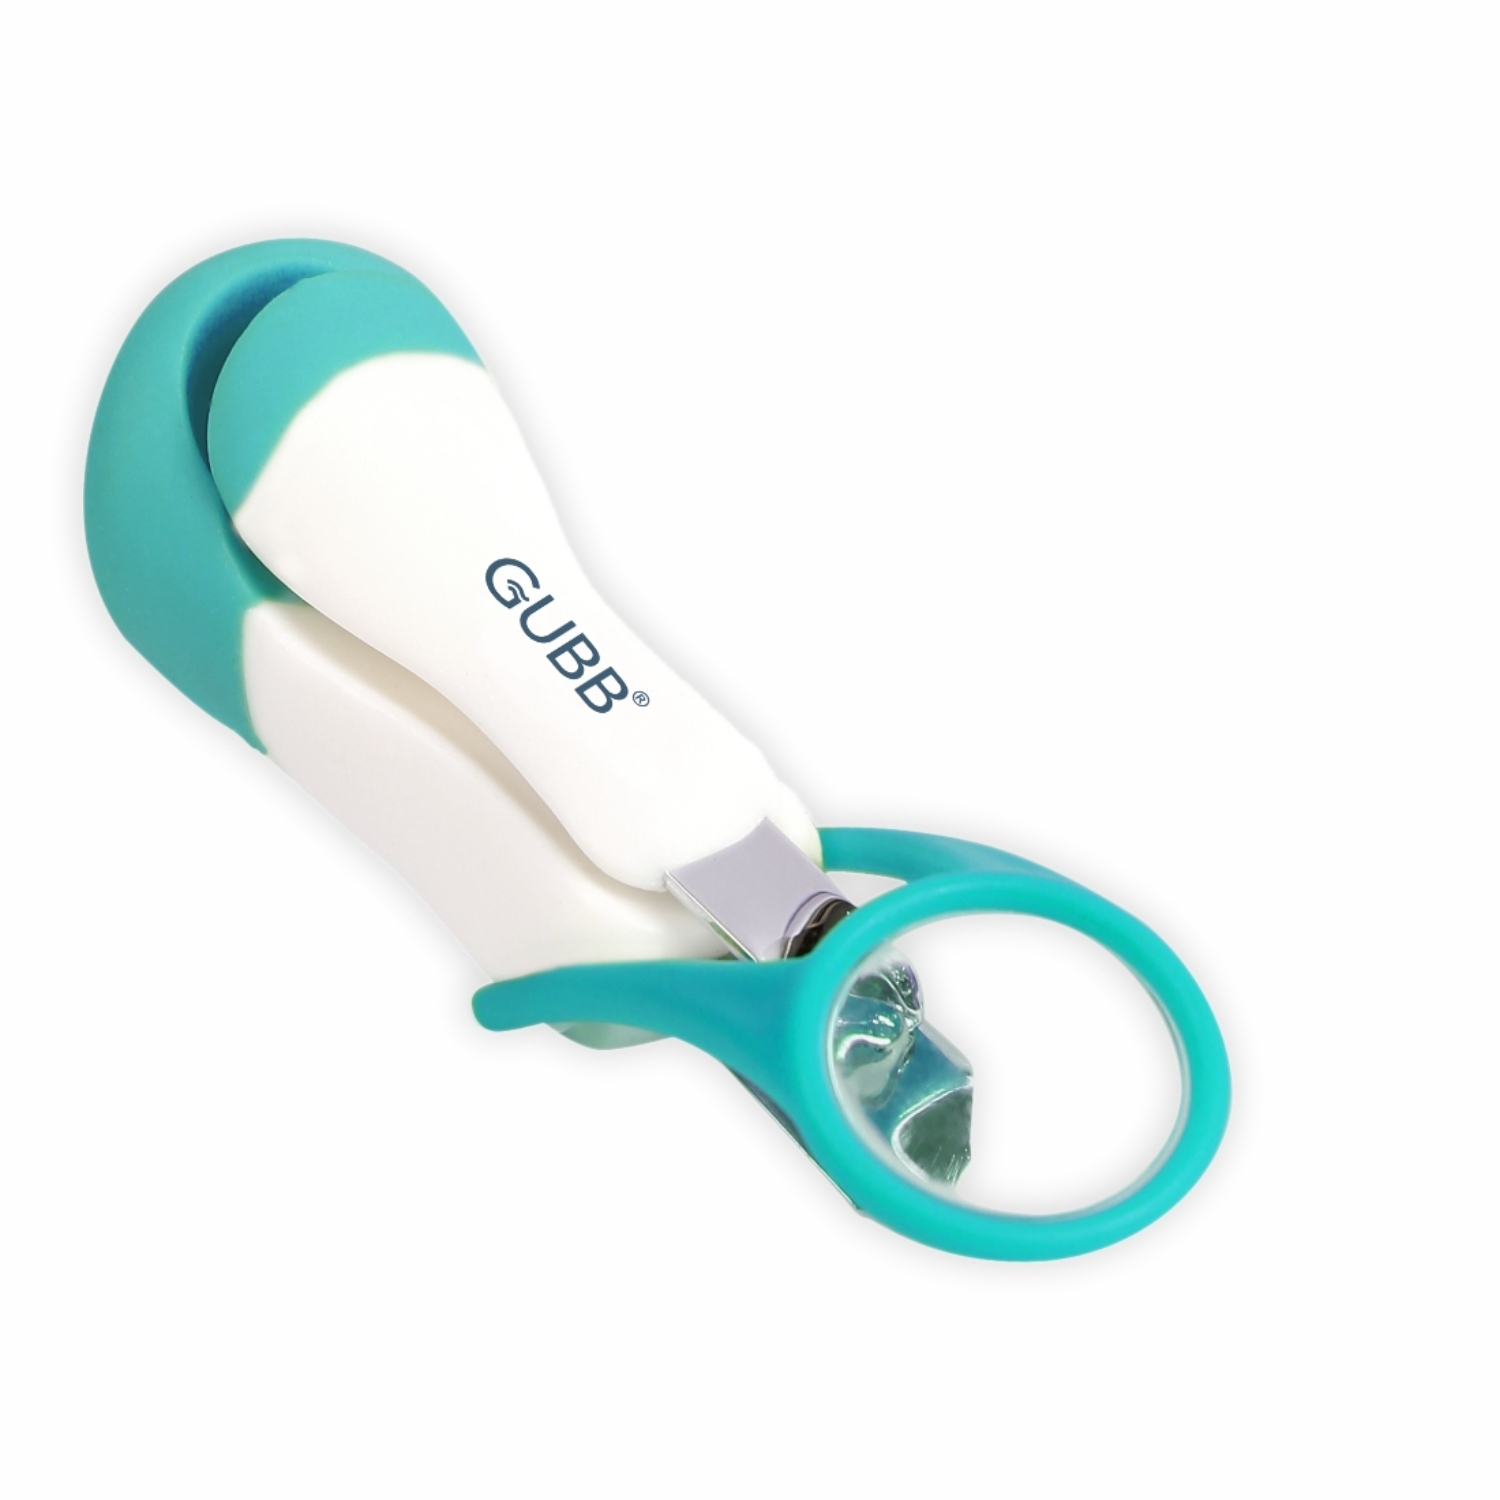 Baby Nail Clippers - Buy Infant Nails Cutter Set Online in India